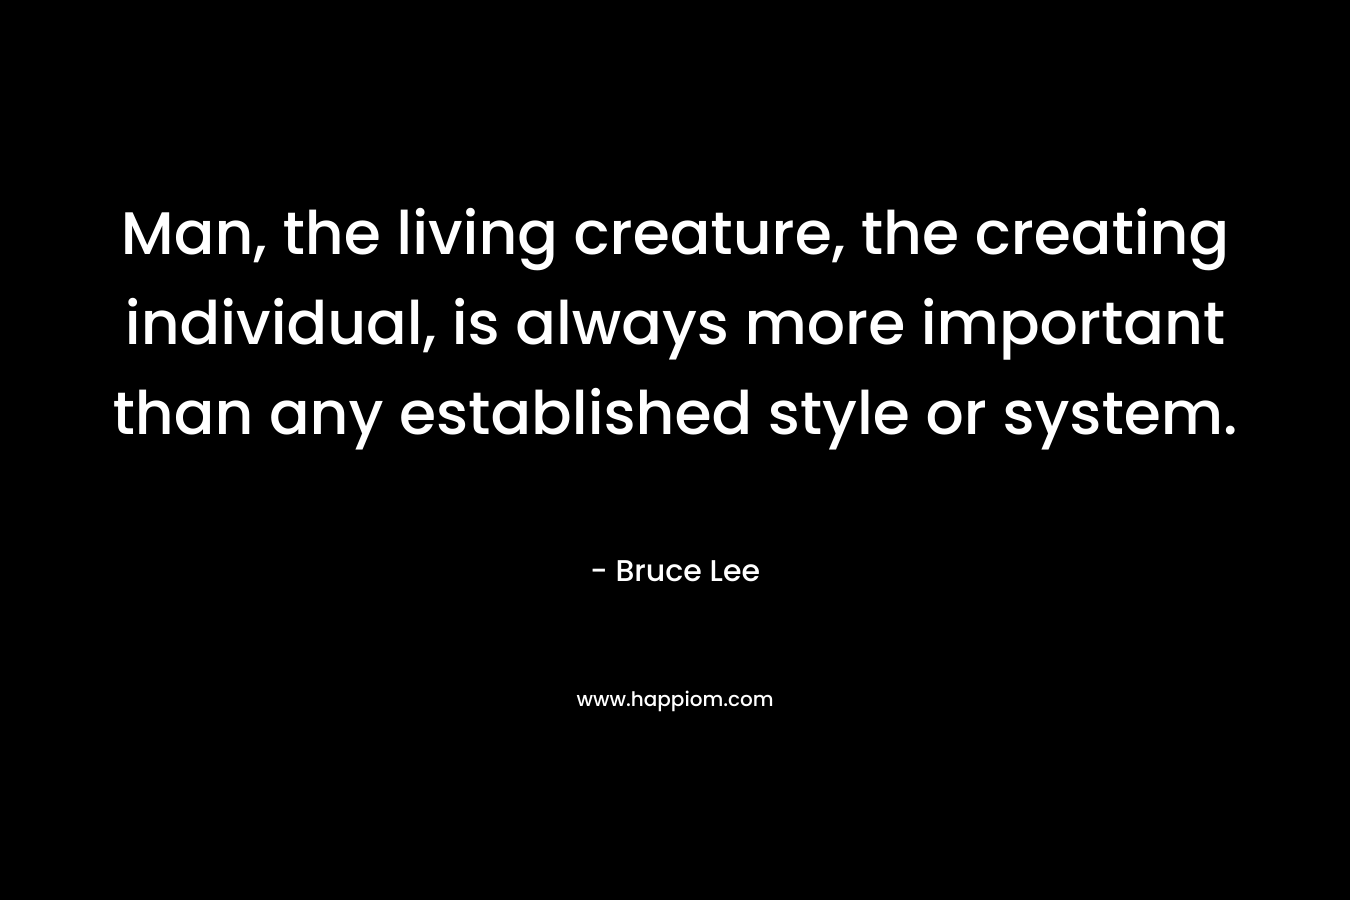 Man, the living creature, the creating individual, is always more important than any established style or system. – Bruce Lee